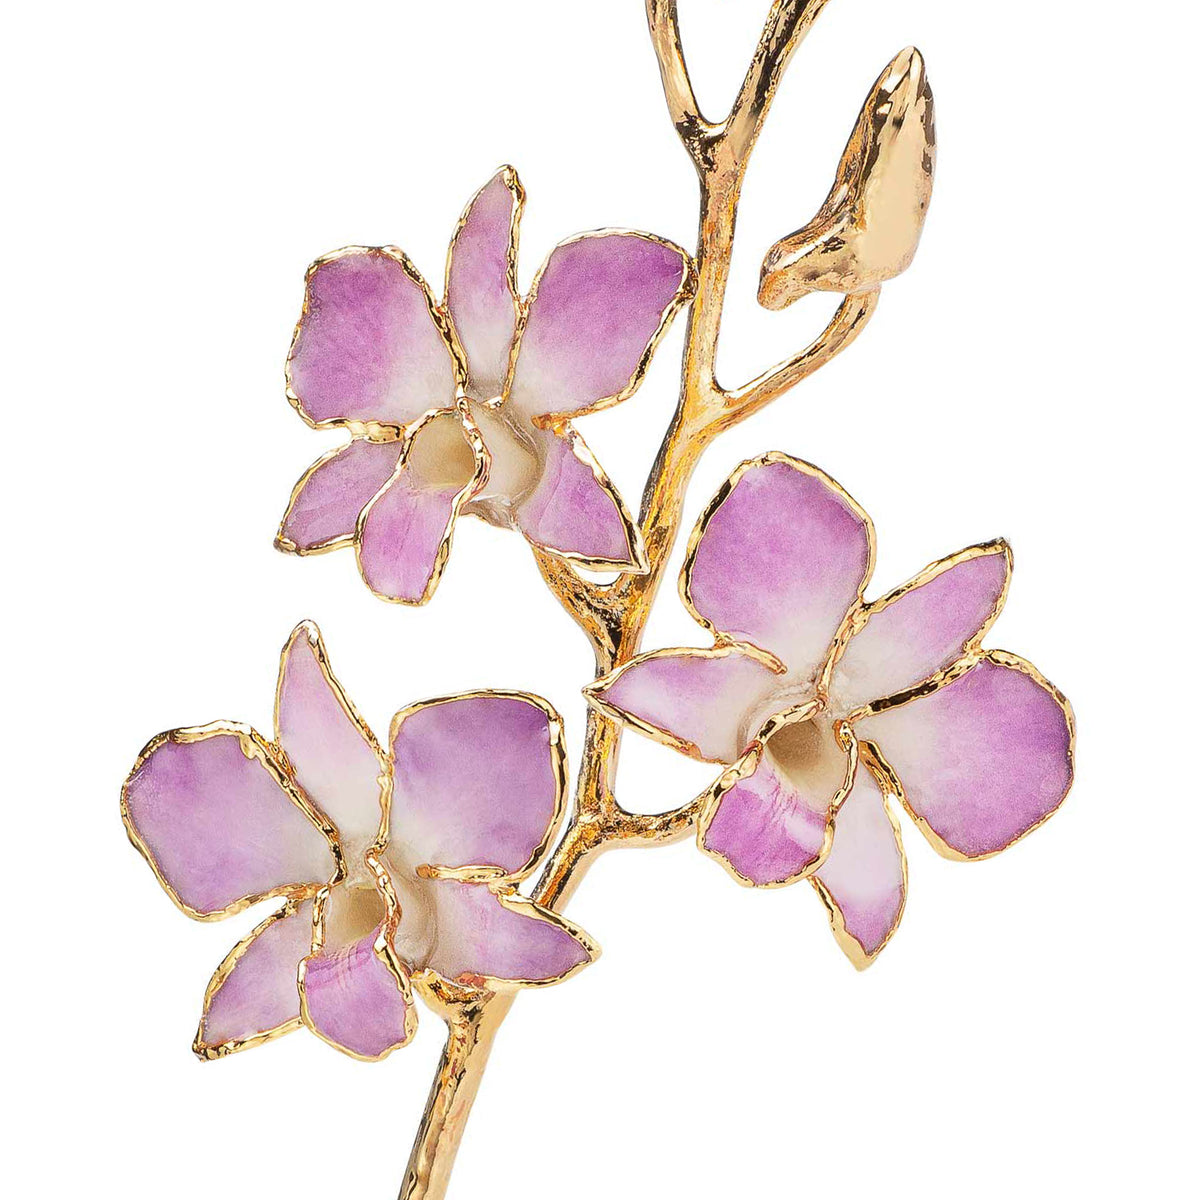 24K Gold Dipped Orchid in Lilac view of closer view of gold stem and flowers